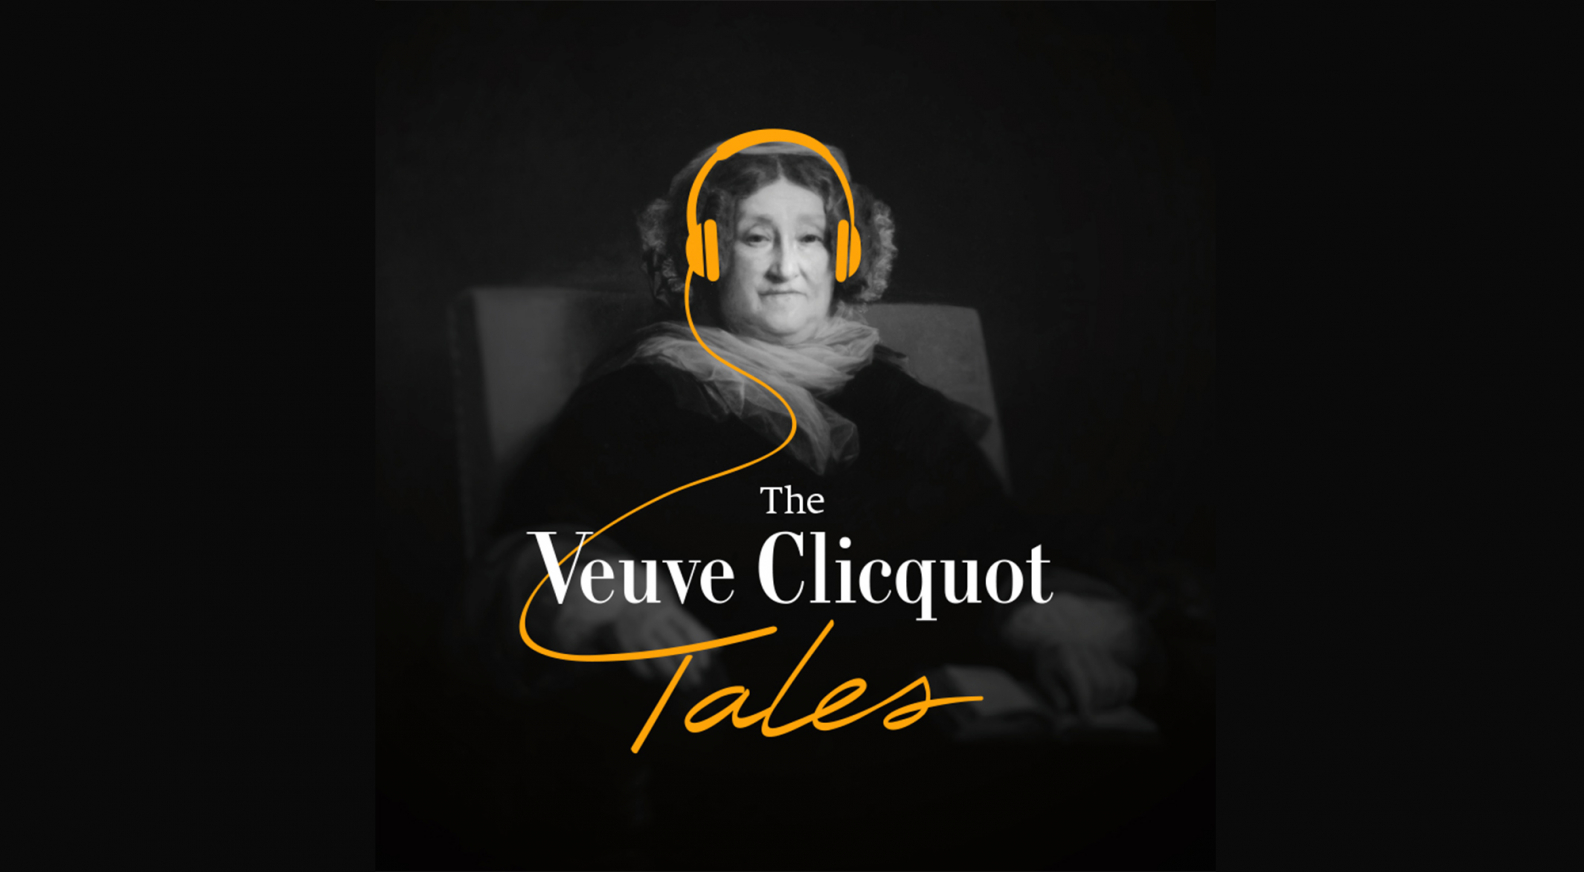 First lady of champagne: The extraordinary woman behind Veuve